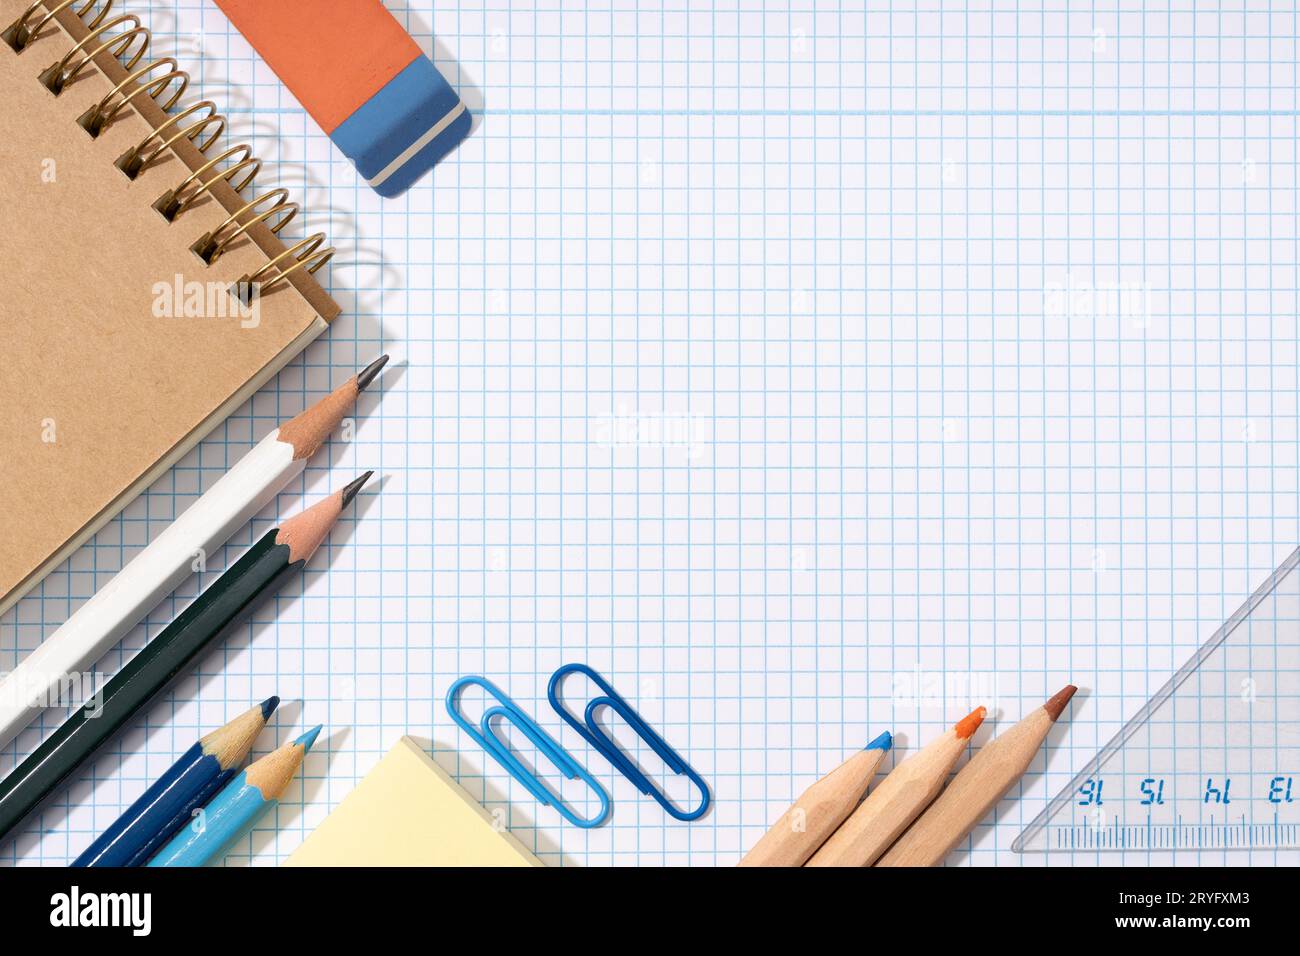 Flat lay of School and office supplies on blank graph paper sheet. Back to school background. Copy space Stock Photo